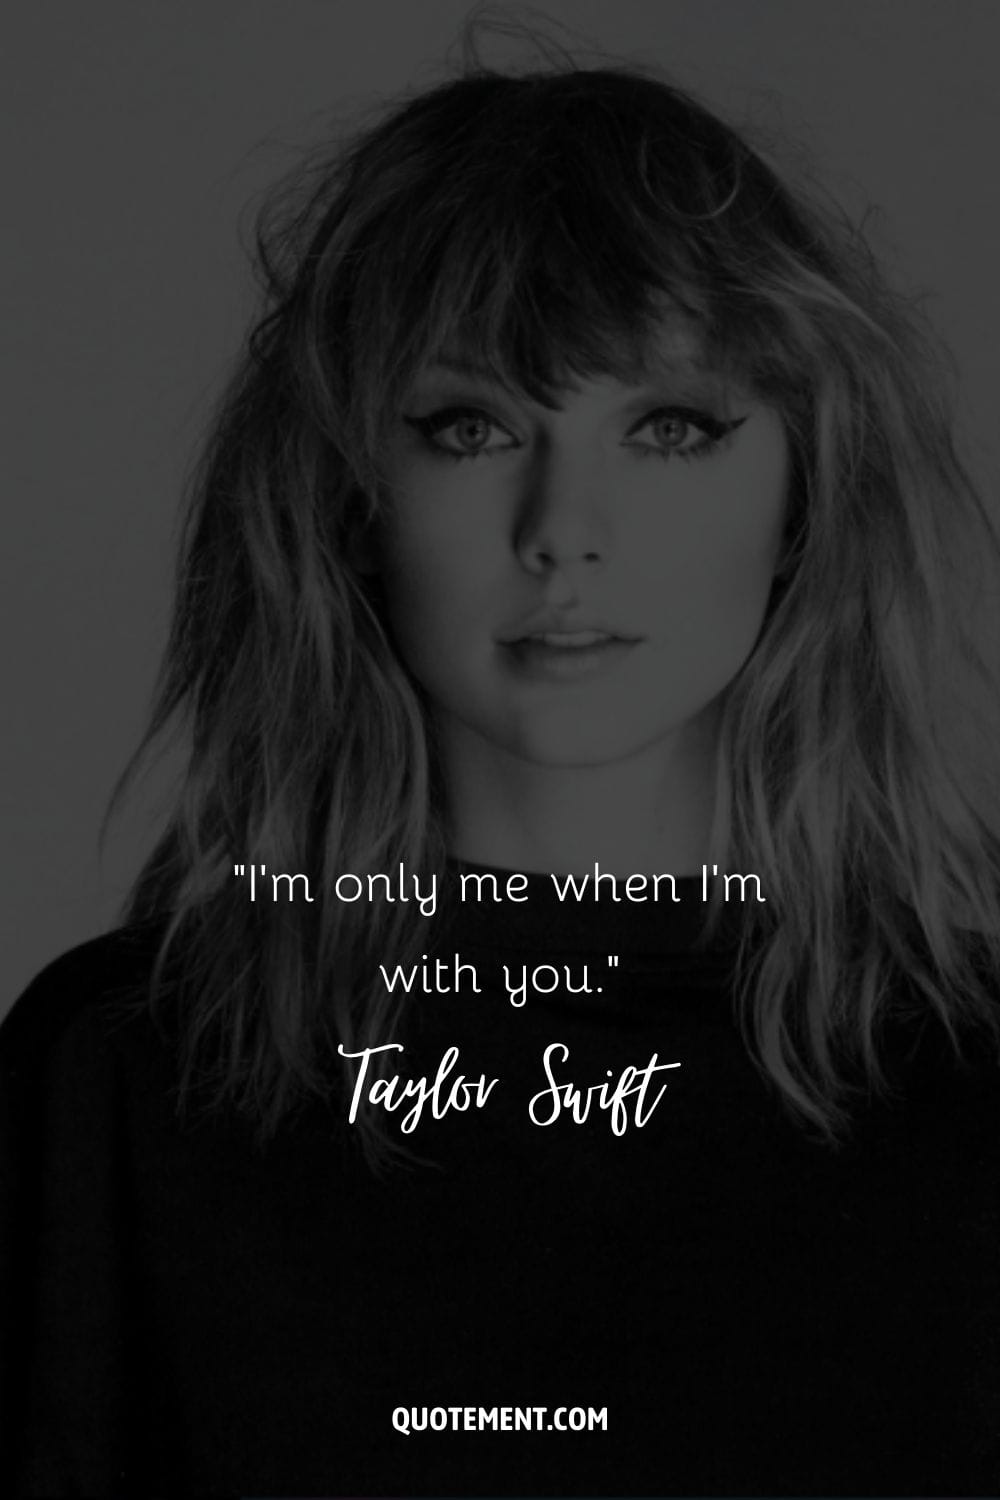 “I'm only me when I'm with you.” ― Taylor Swift